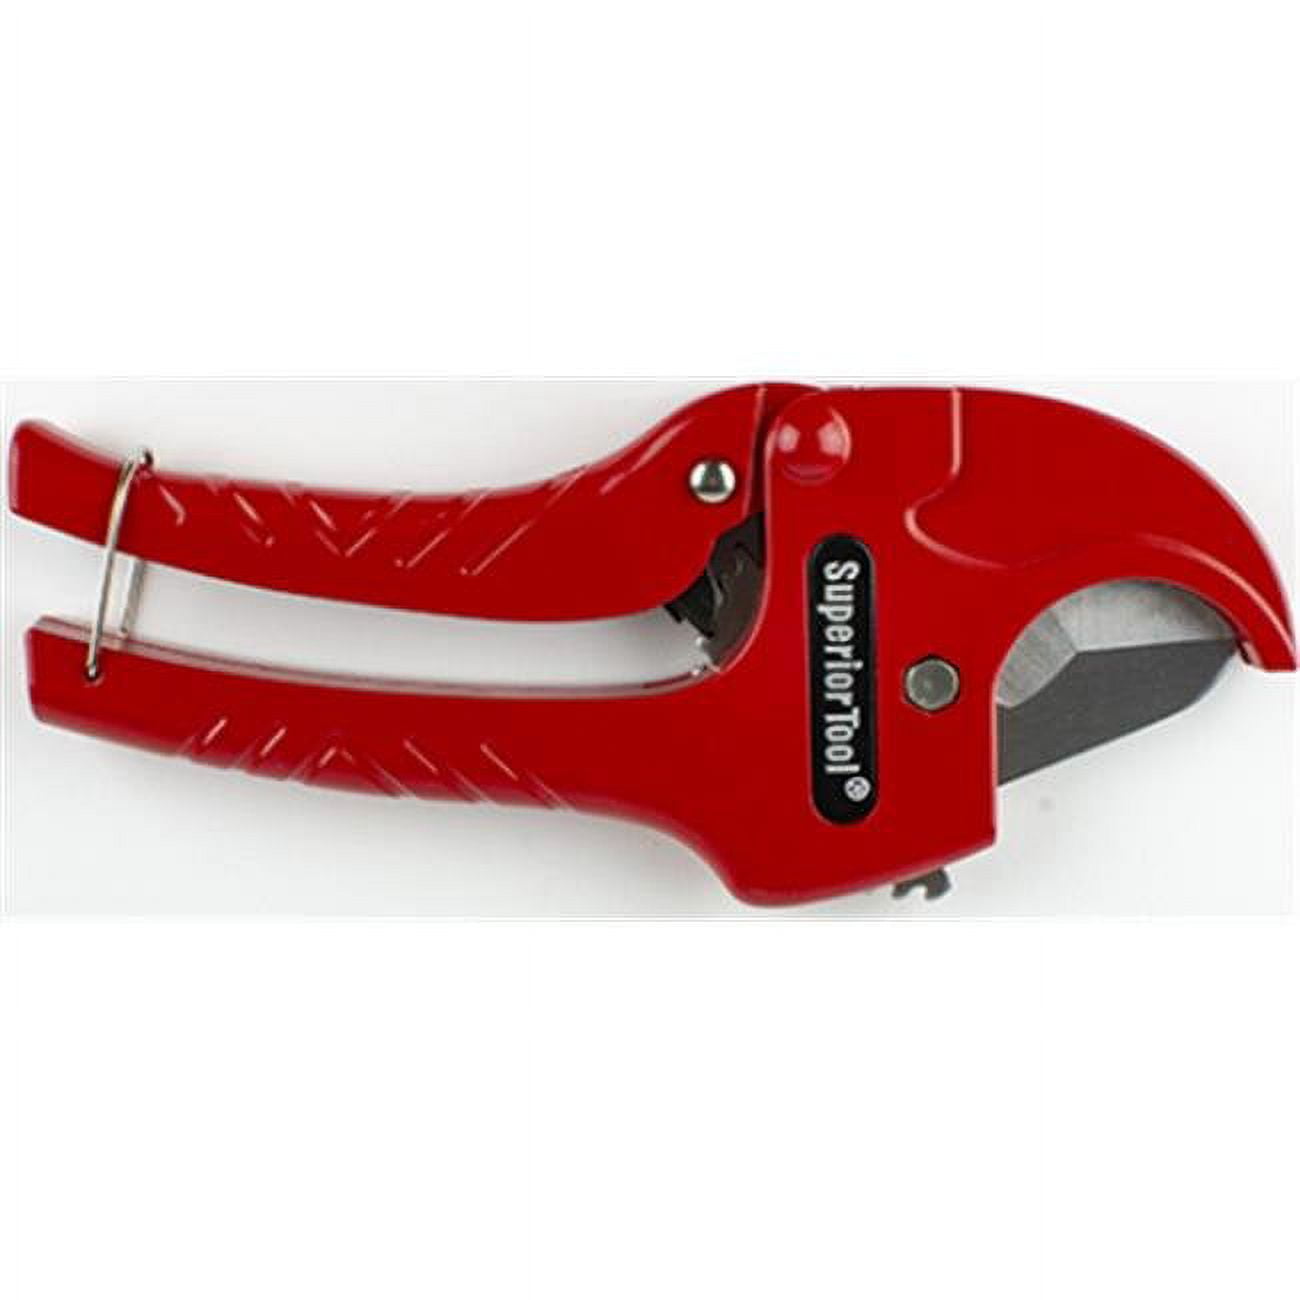 37110 Ratchet Action Stainless Steel Pvc Cutter With Blade